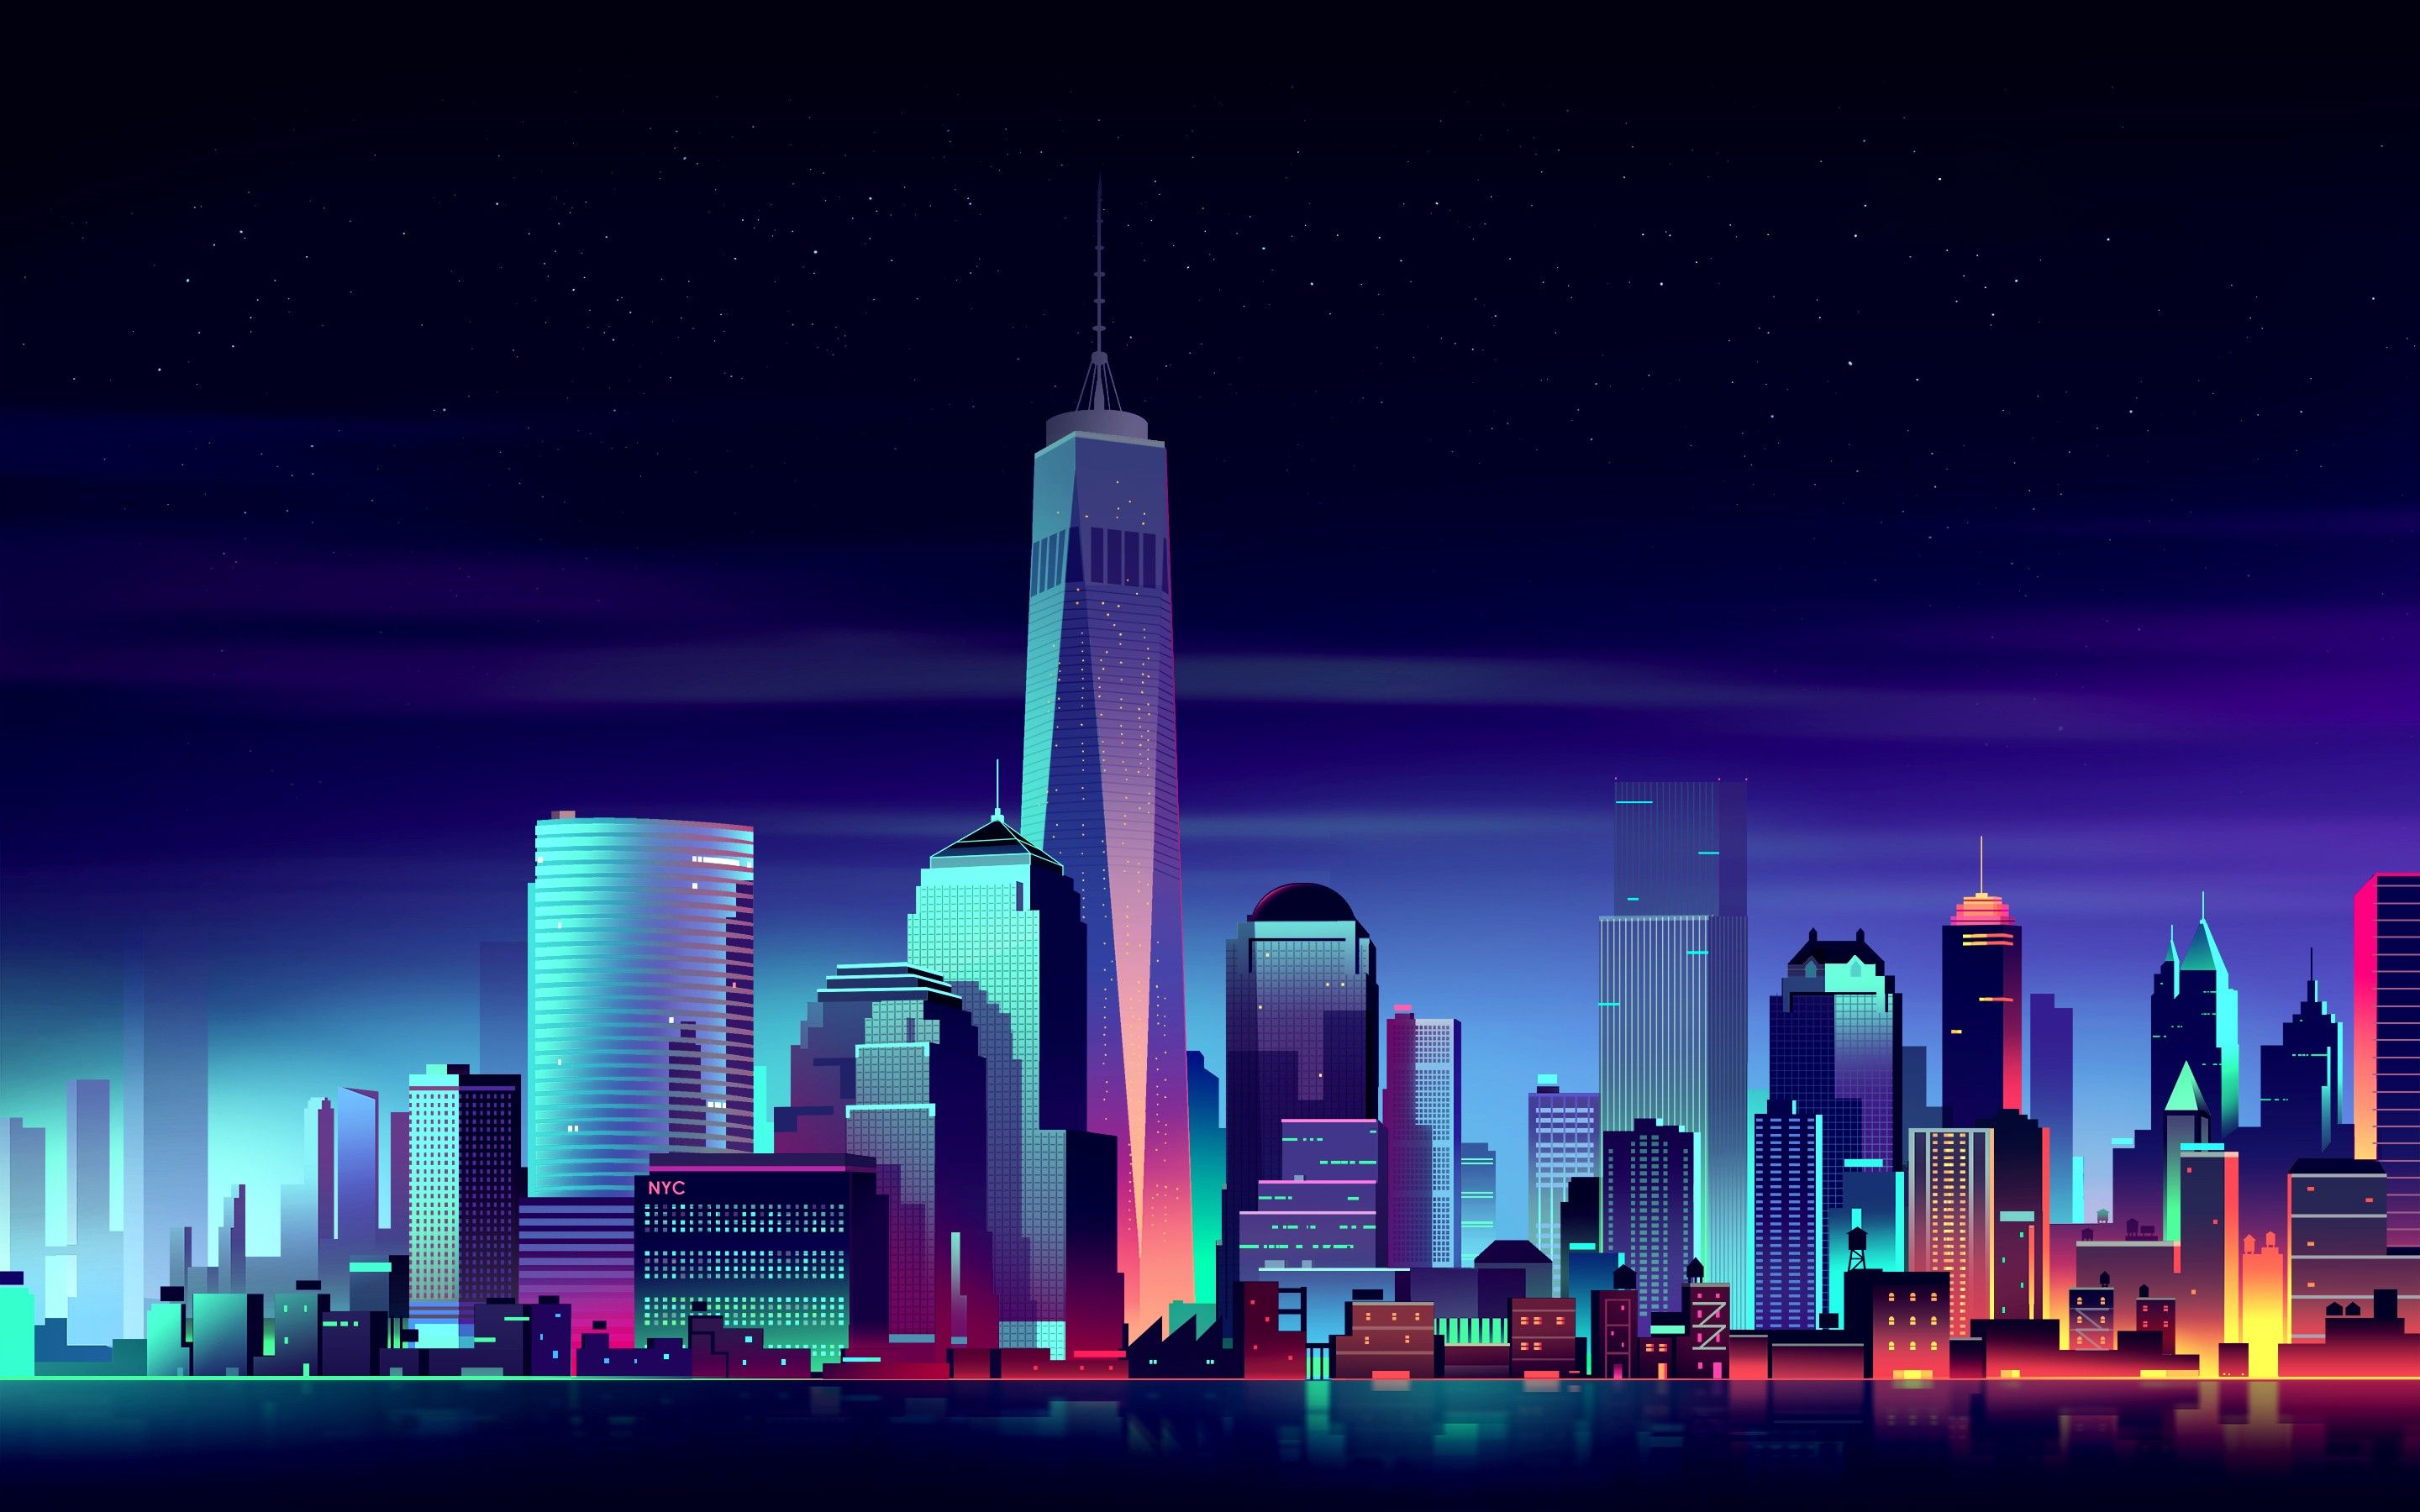 Download HD Wallpaper Of 273761 Night, Cityscape, Colorful, New_York_City. Free Download High Quality And. Building Illustration, City Buildings, City Wallpaper